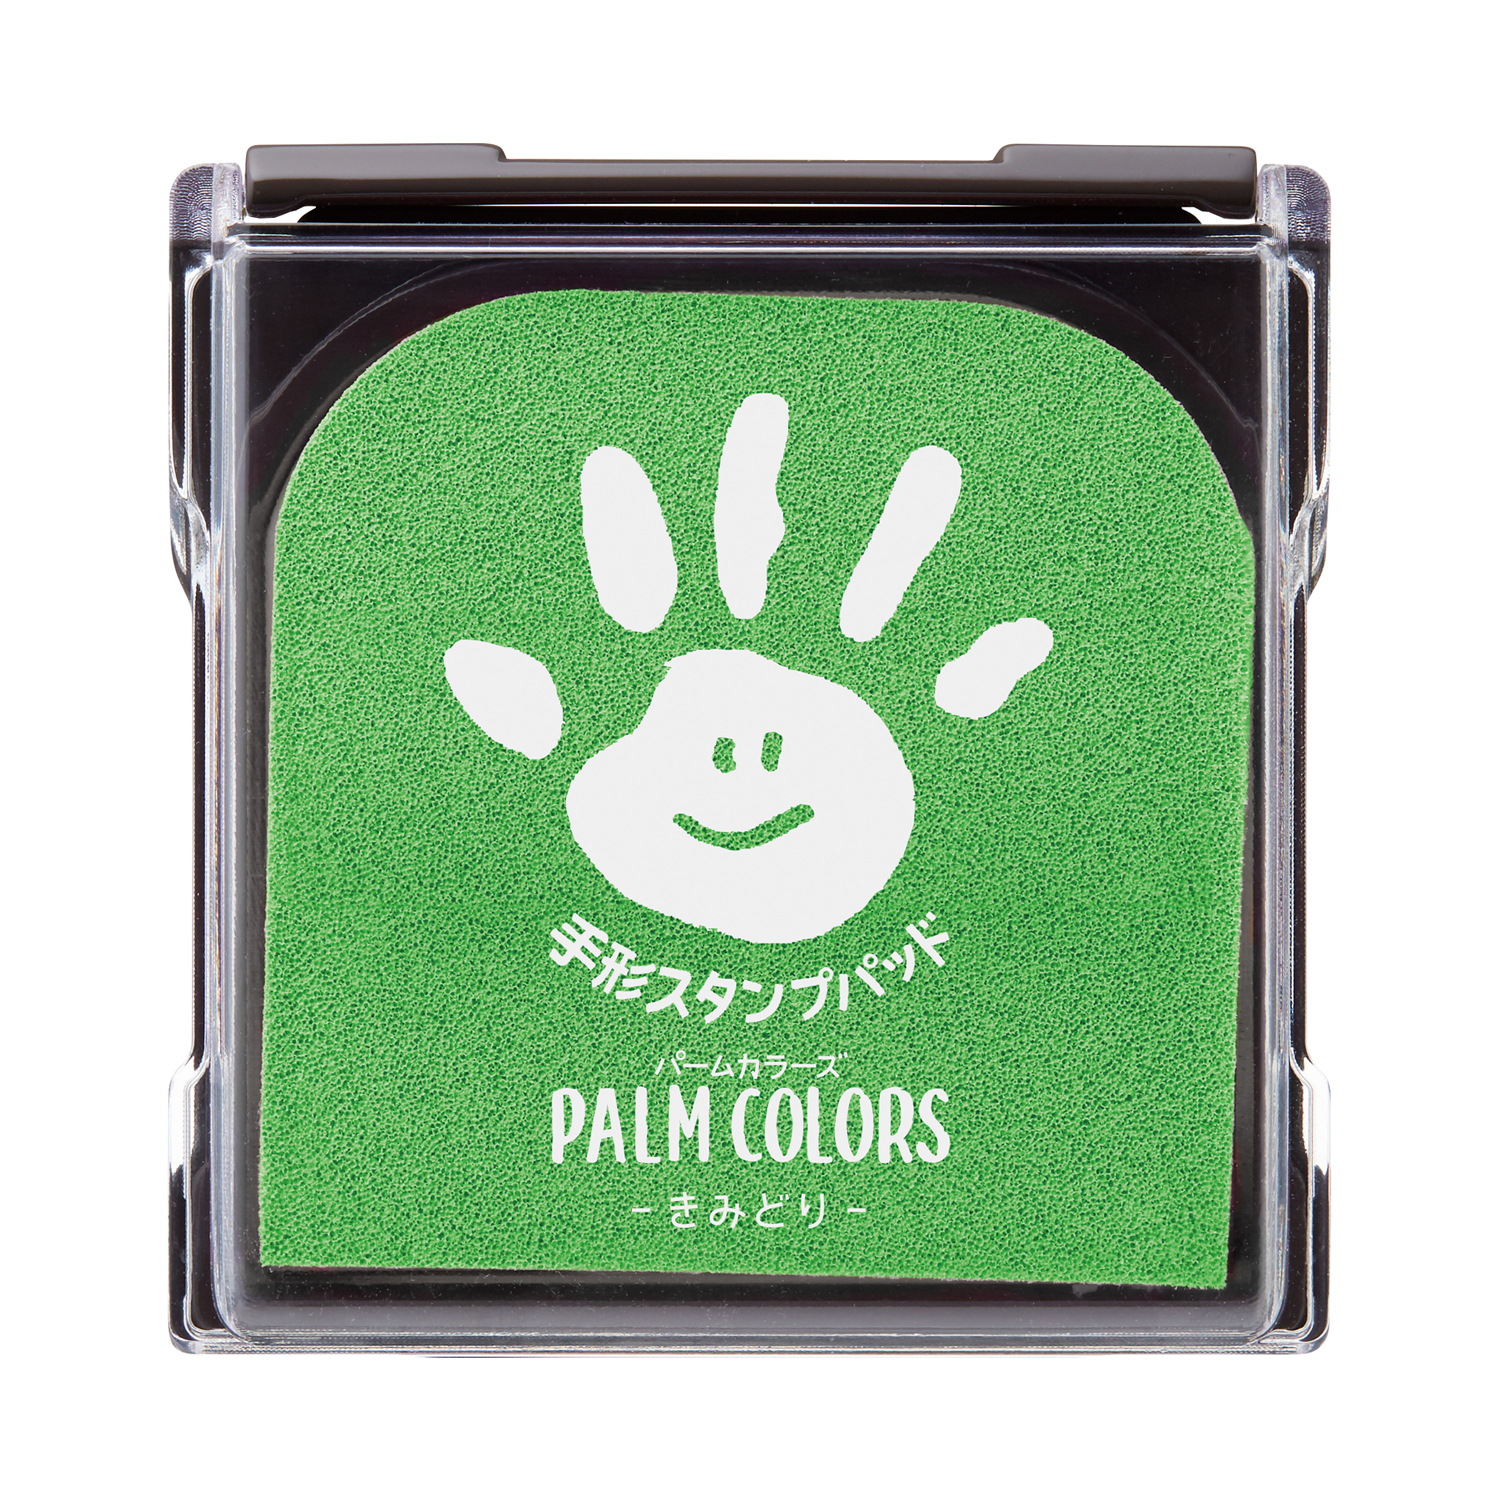 PALM COLORS きみどり